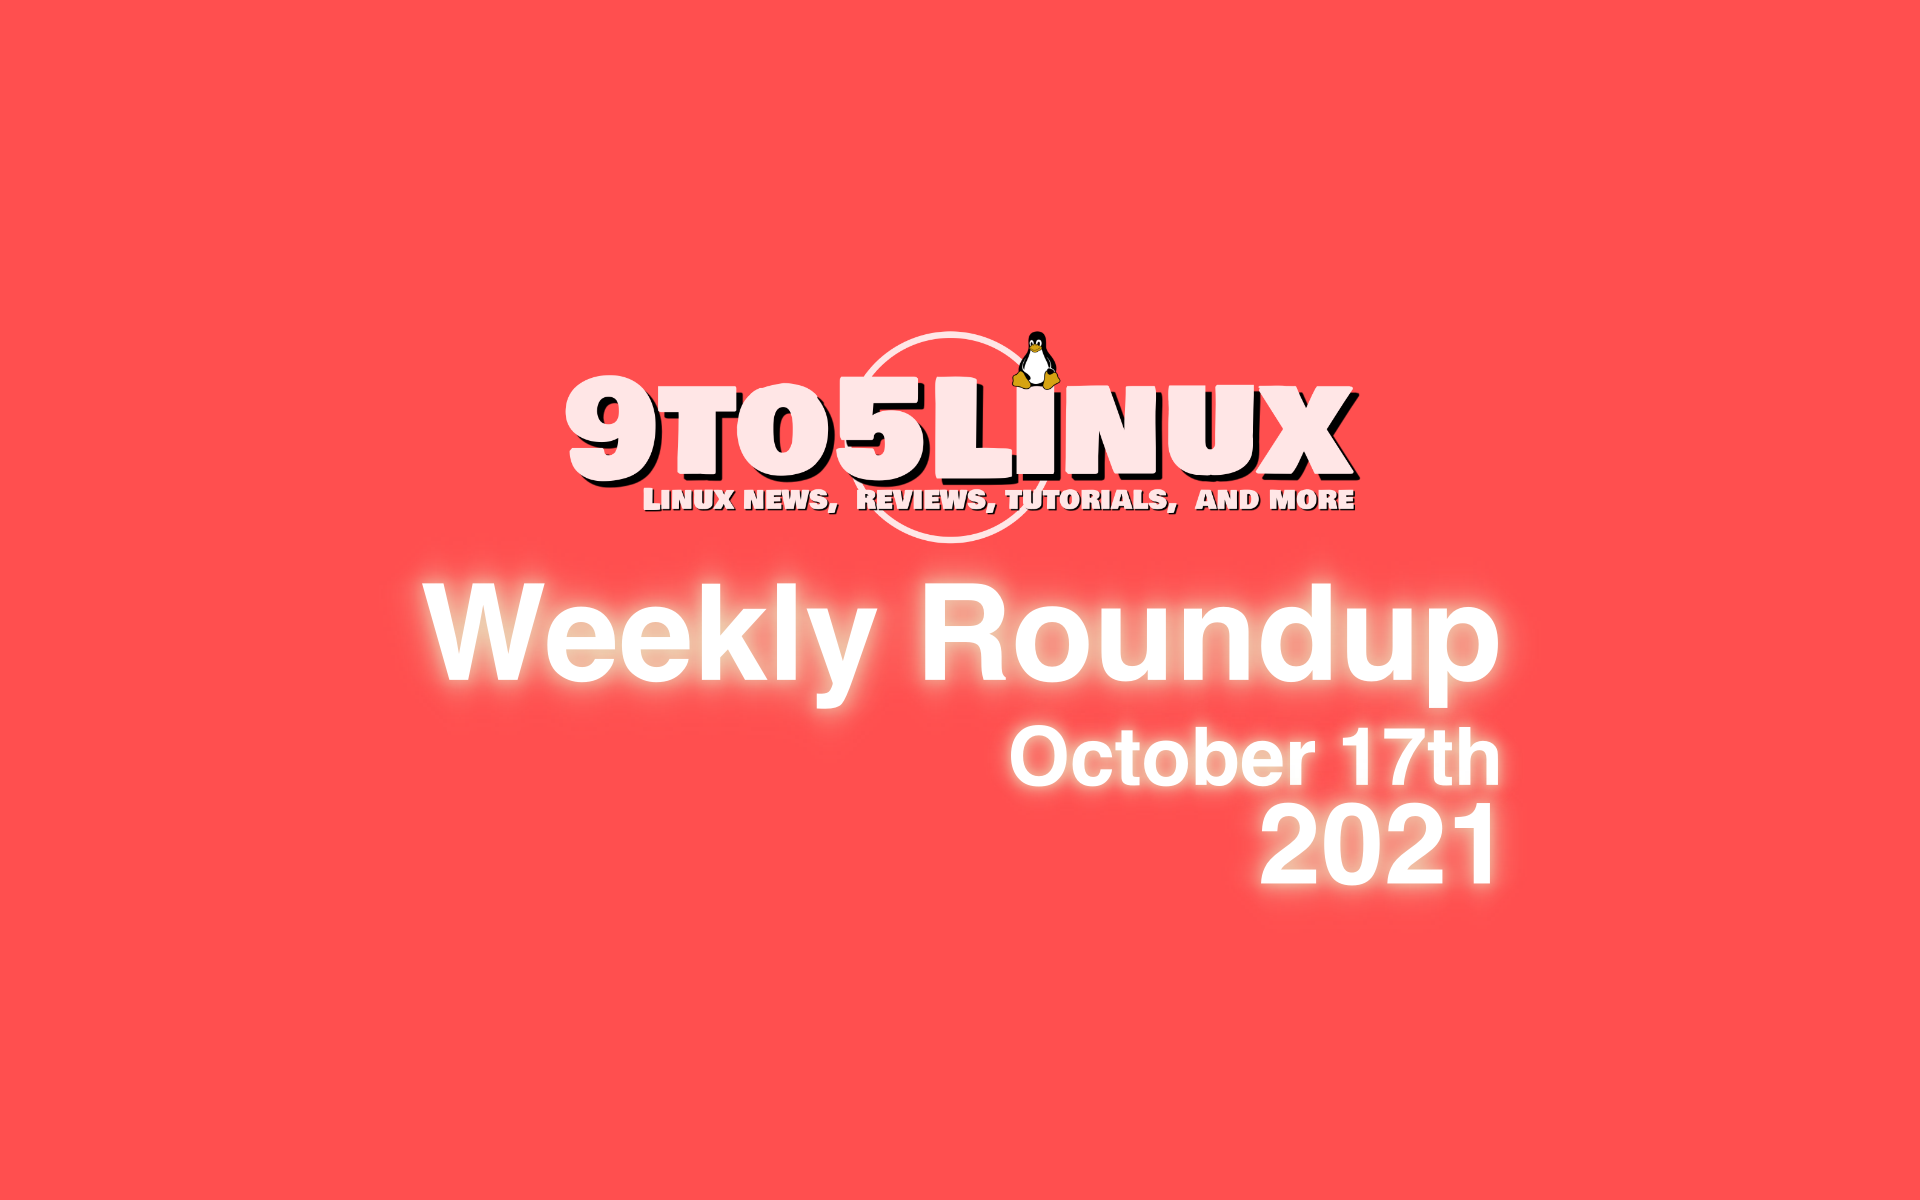 9to5Linux Weekly Roundup: October 17th, 2021